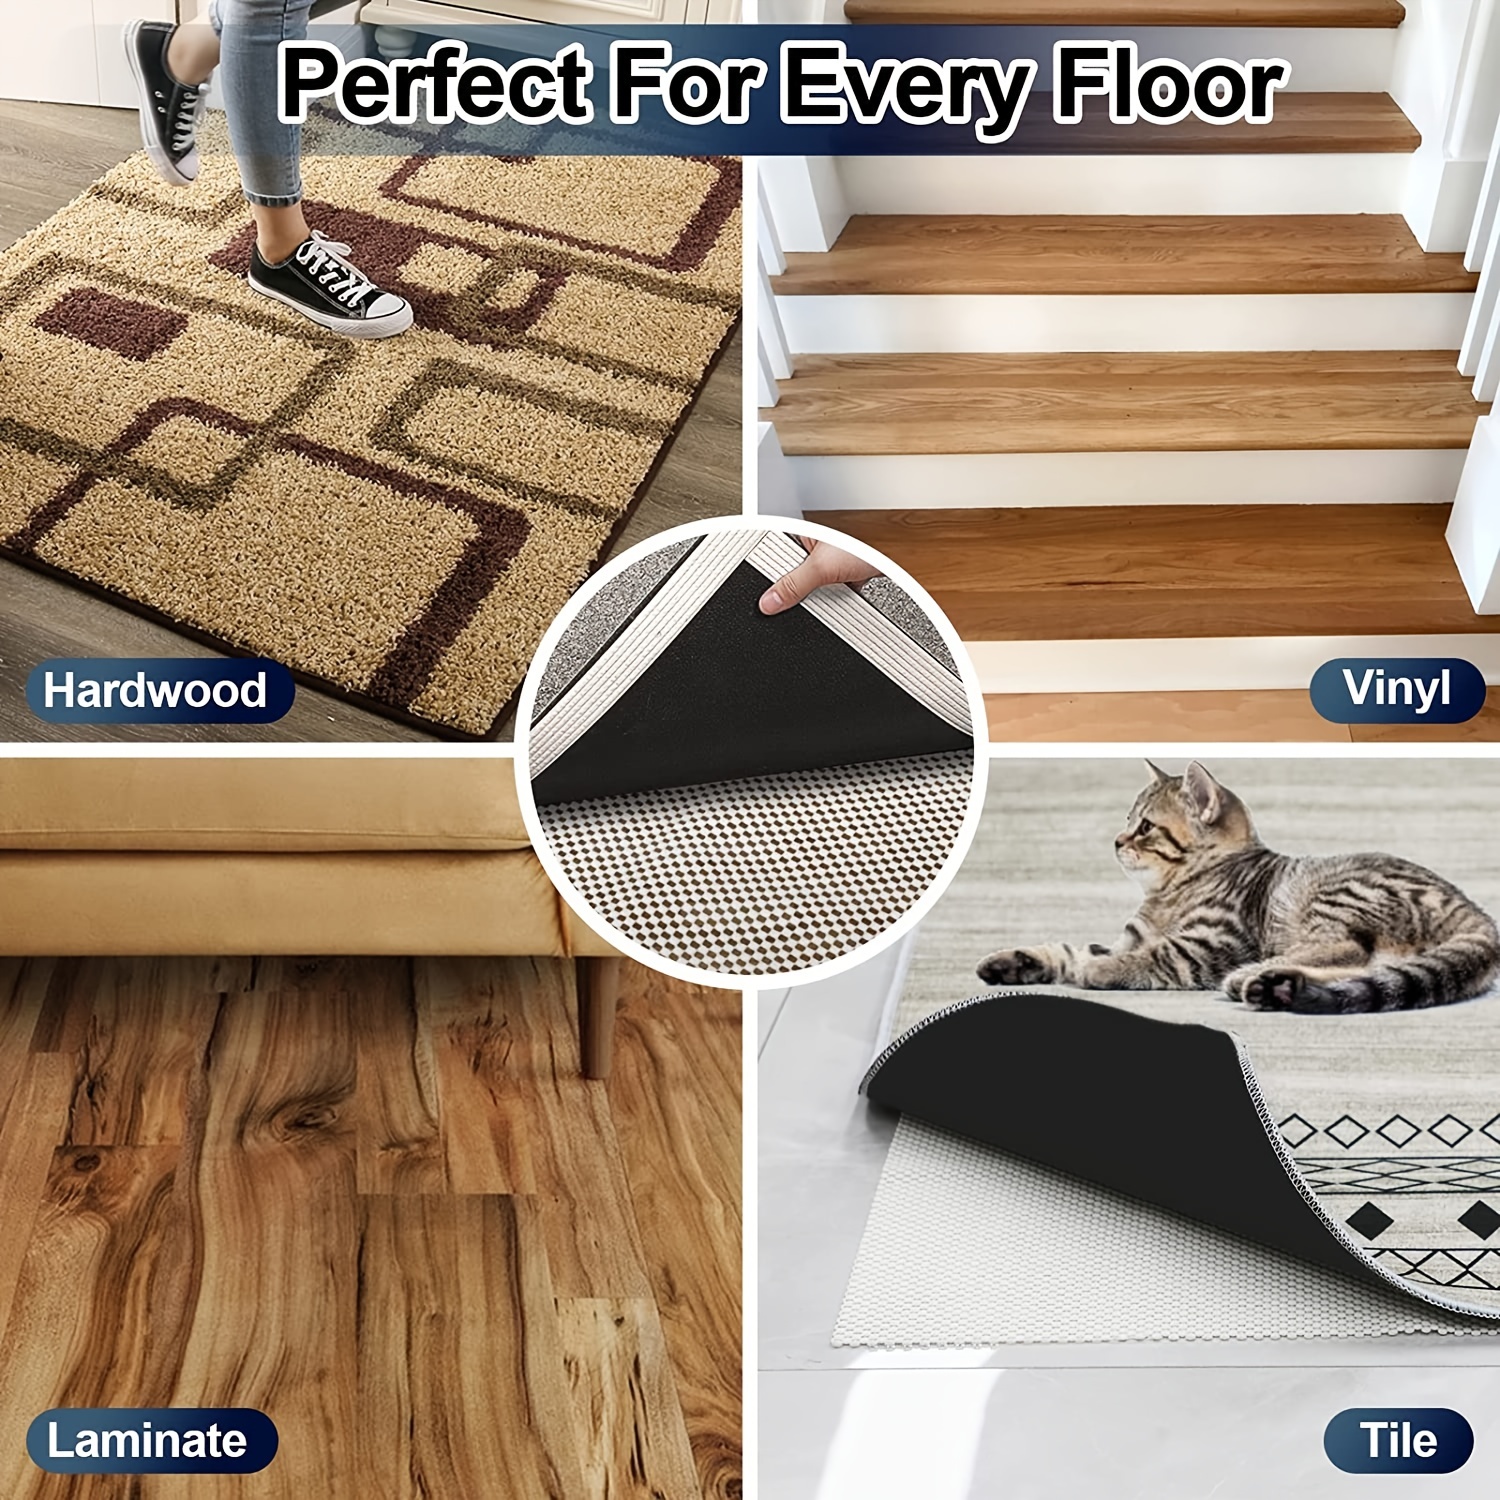 Veken Non-Slip Rug Pad Gripper 2 x 8 Feet Extra Thick Pads for Hardwood  Floors, Keep Your Rugs Safe and in Place